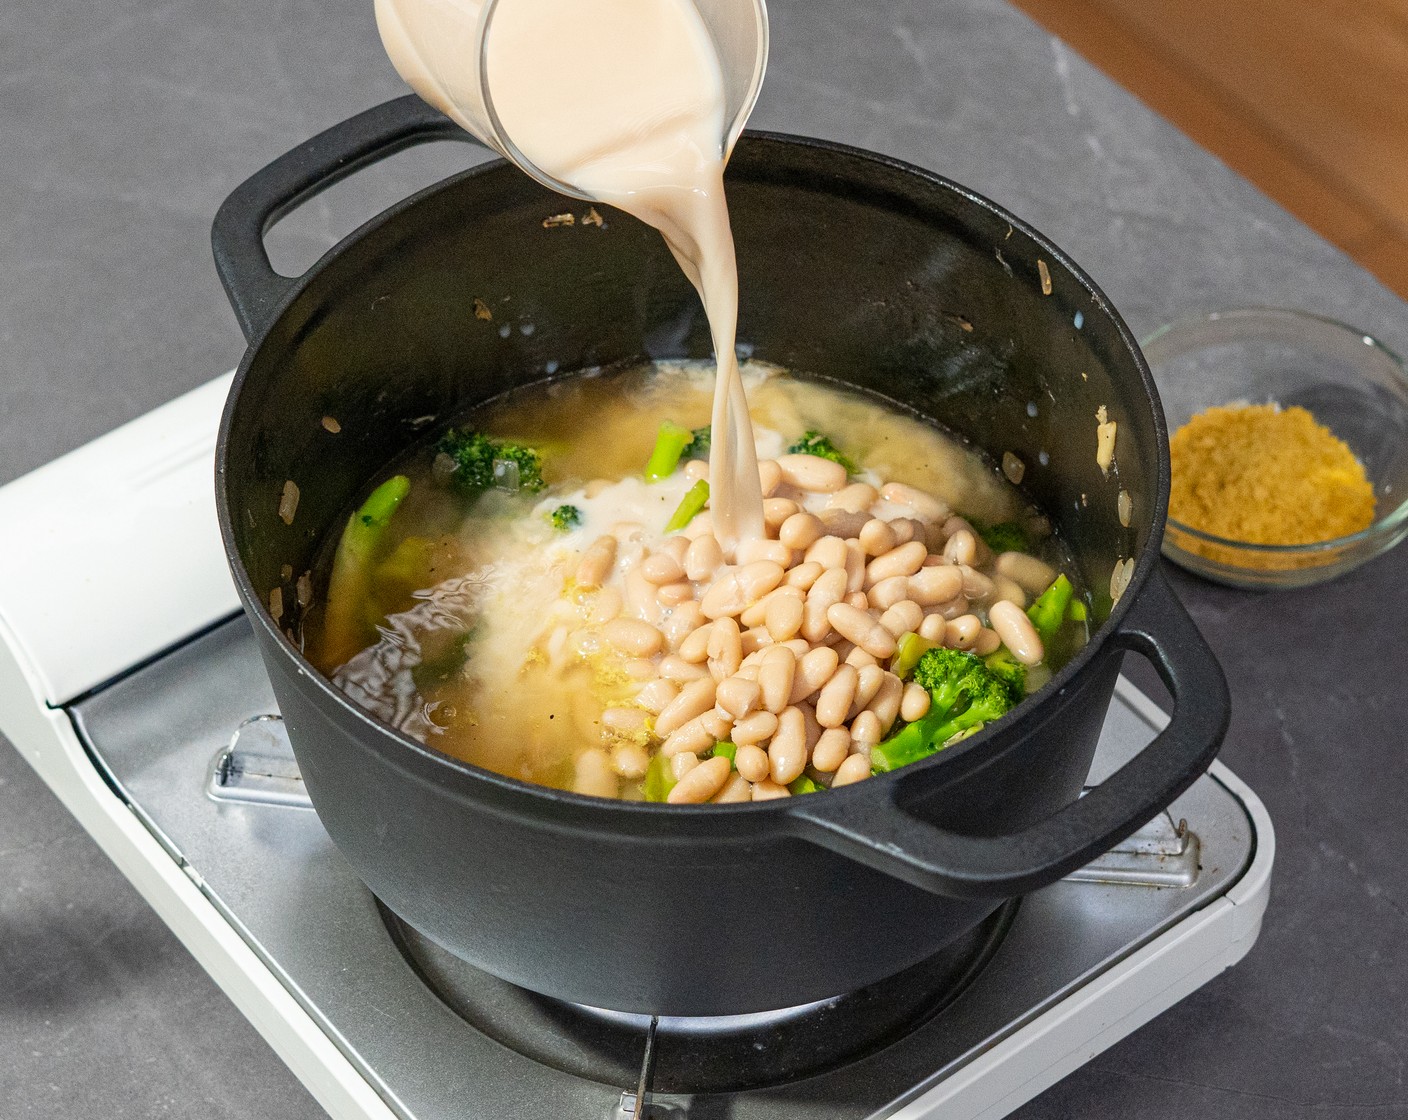 step 3 Add the Cannellini White Kidney Beans (1 can), Vegetable Broth (2 cups), Oat Milk (1 cup), and Nutritional Yeast (2 Tbsp). Bring to a boil, and turn off the heat. Use a stick blender to purée the soup.